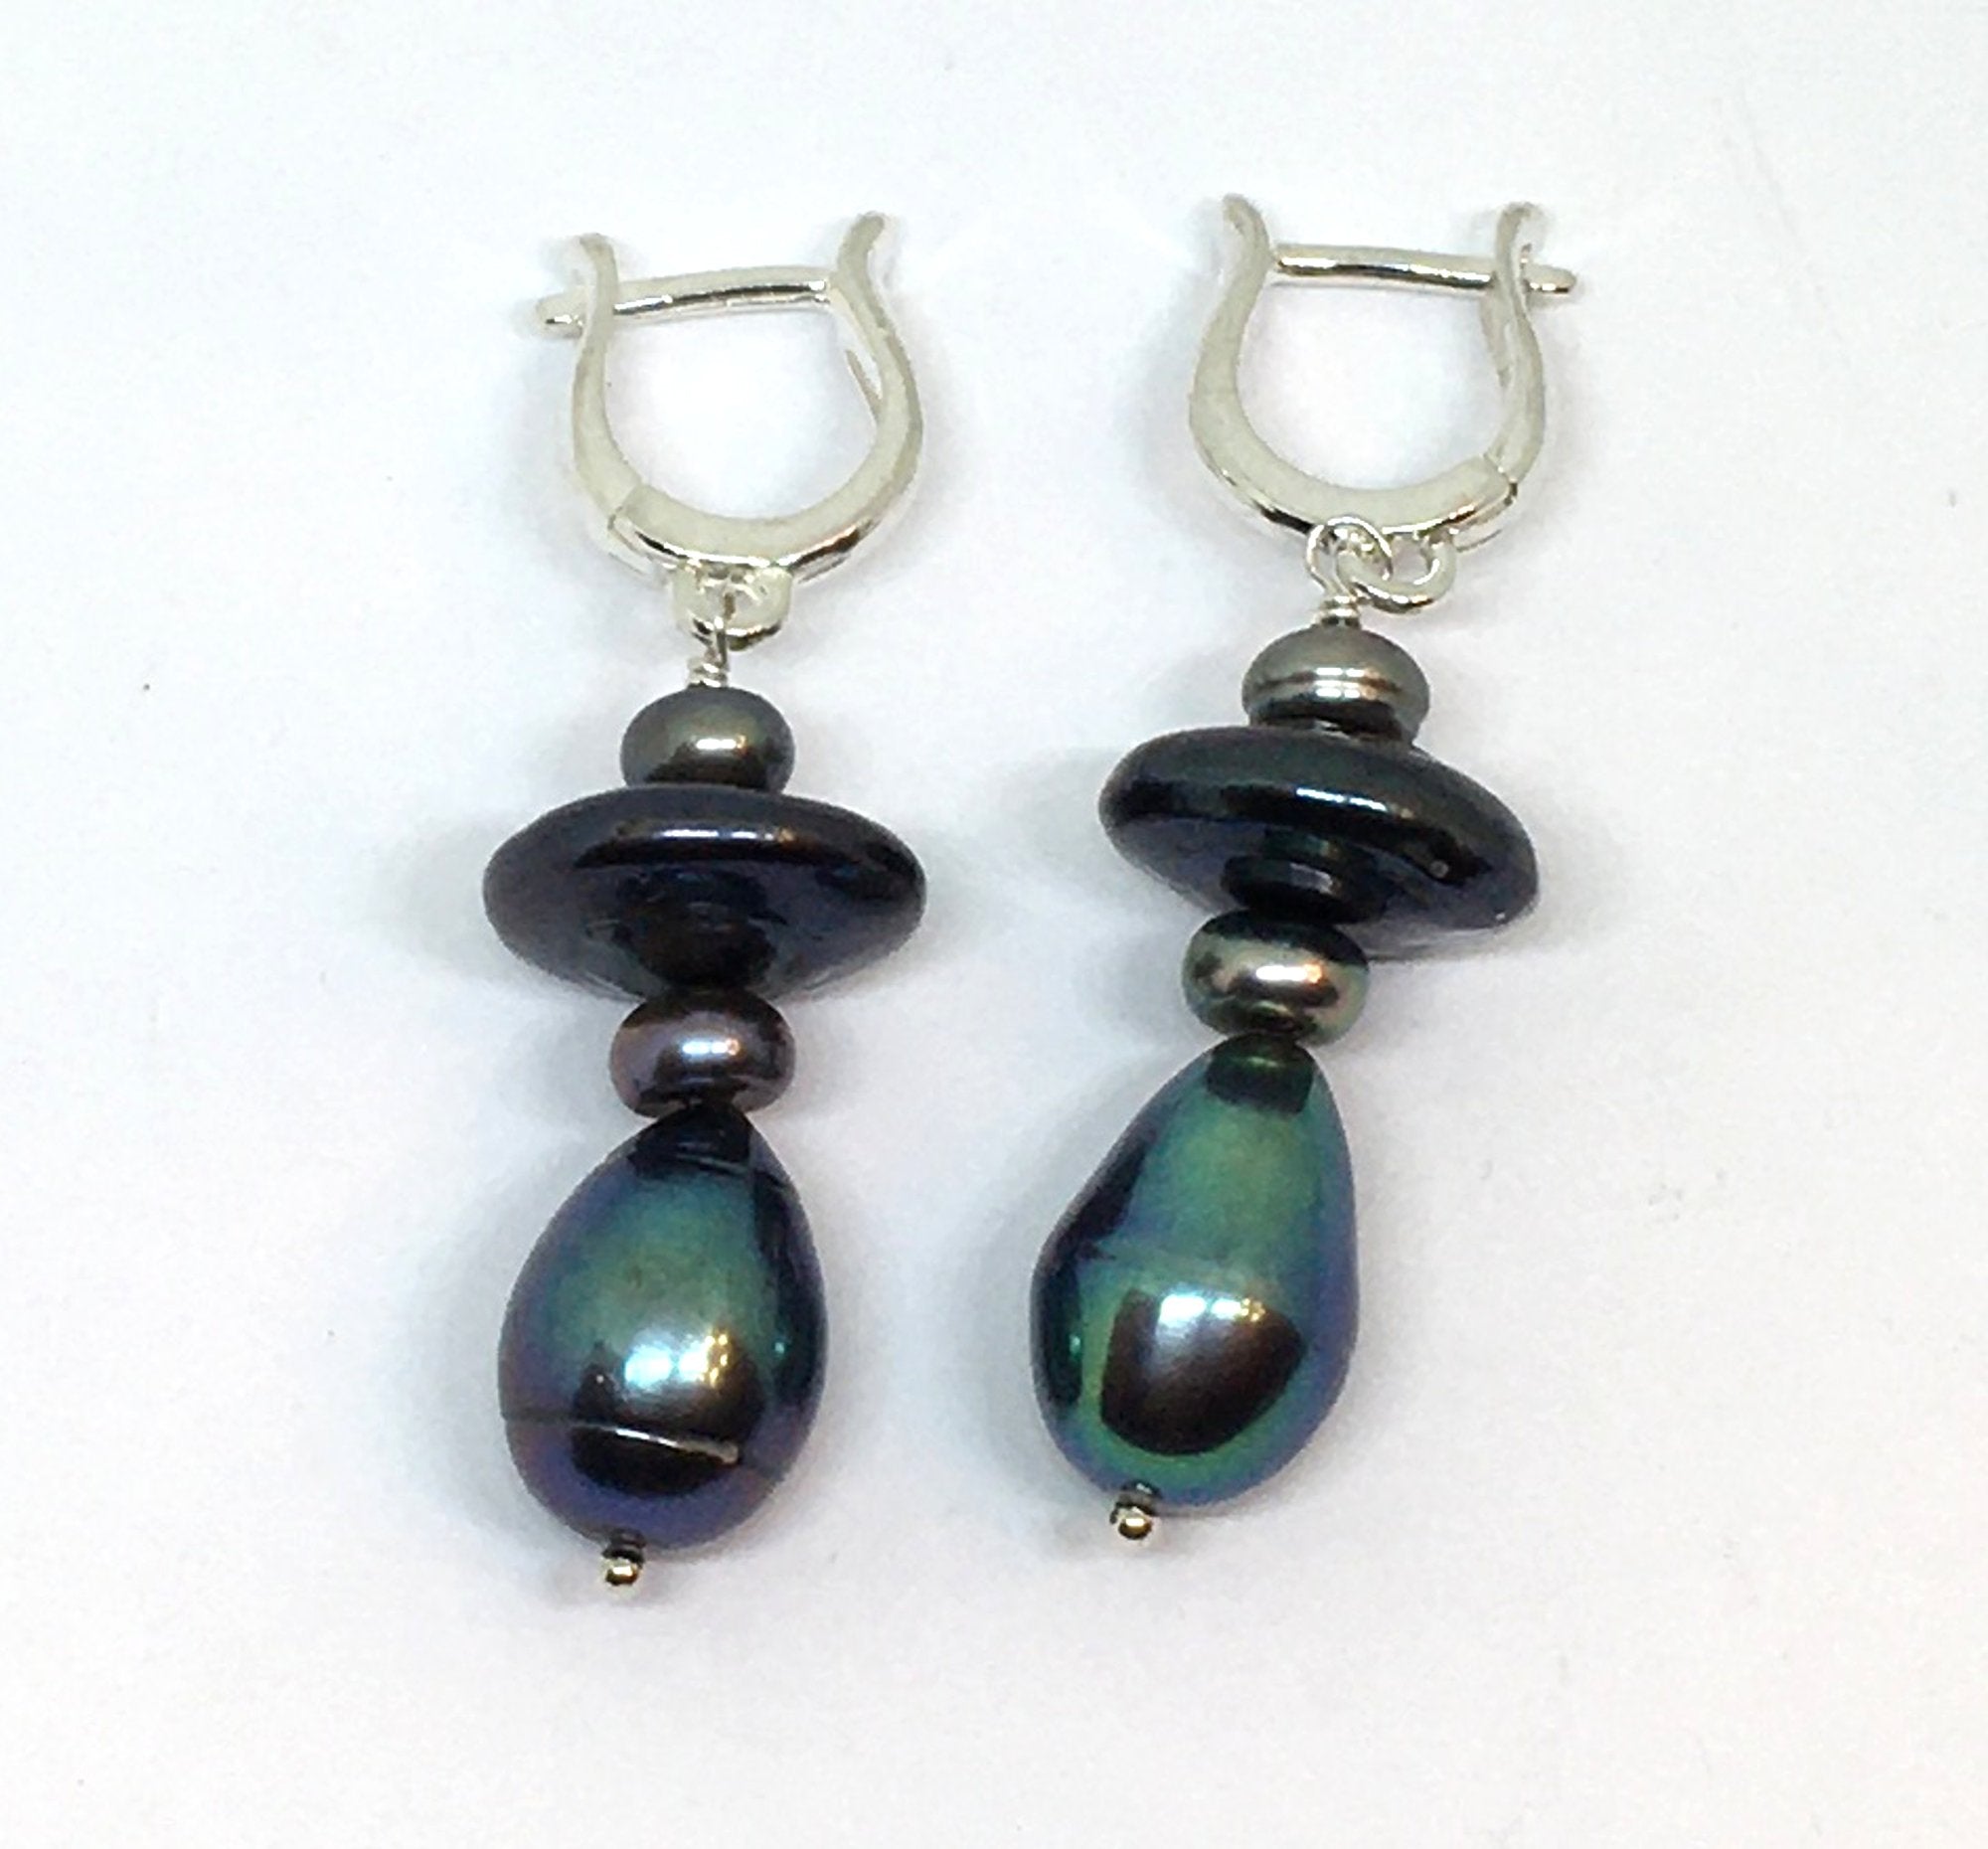 Mixed peacock pearl dangle earrings with omega earwires in sterling silver